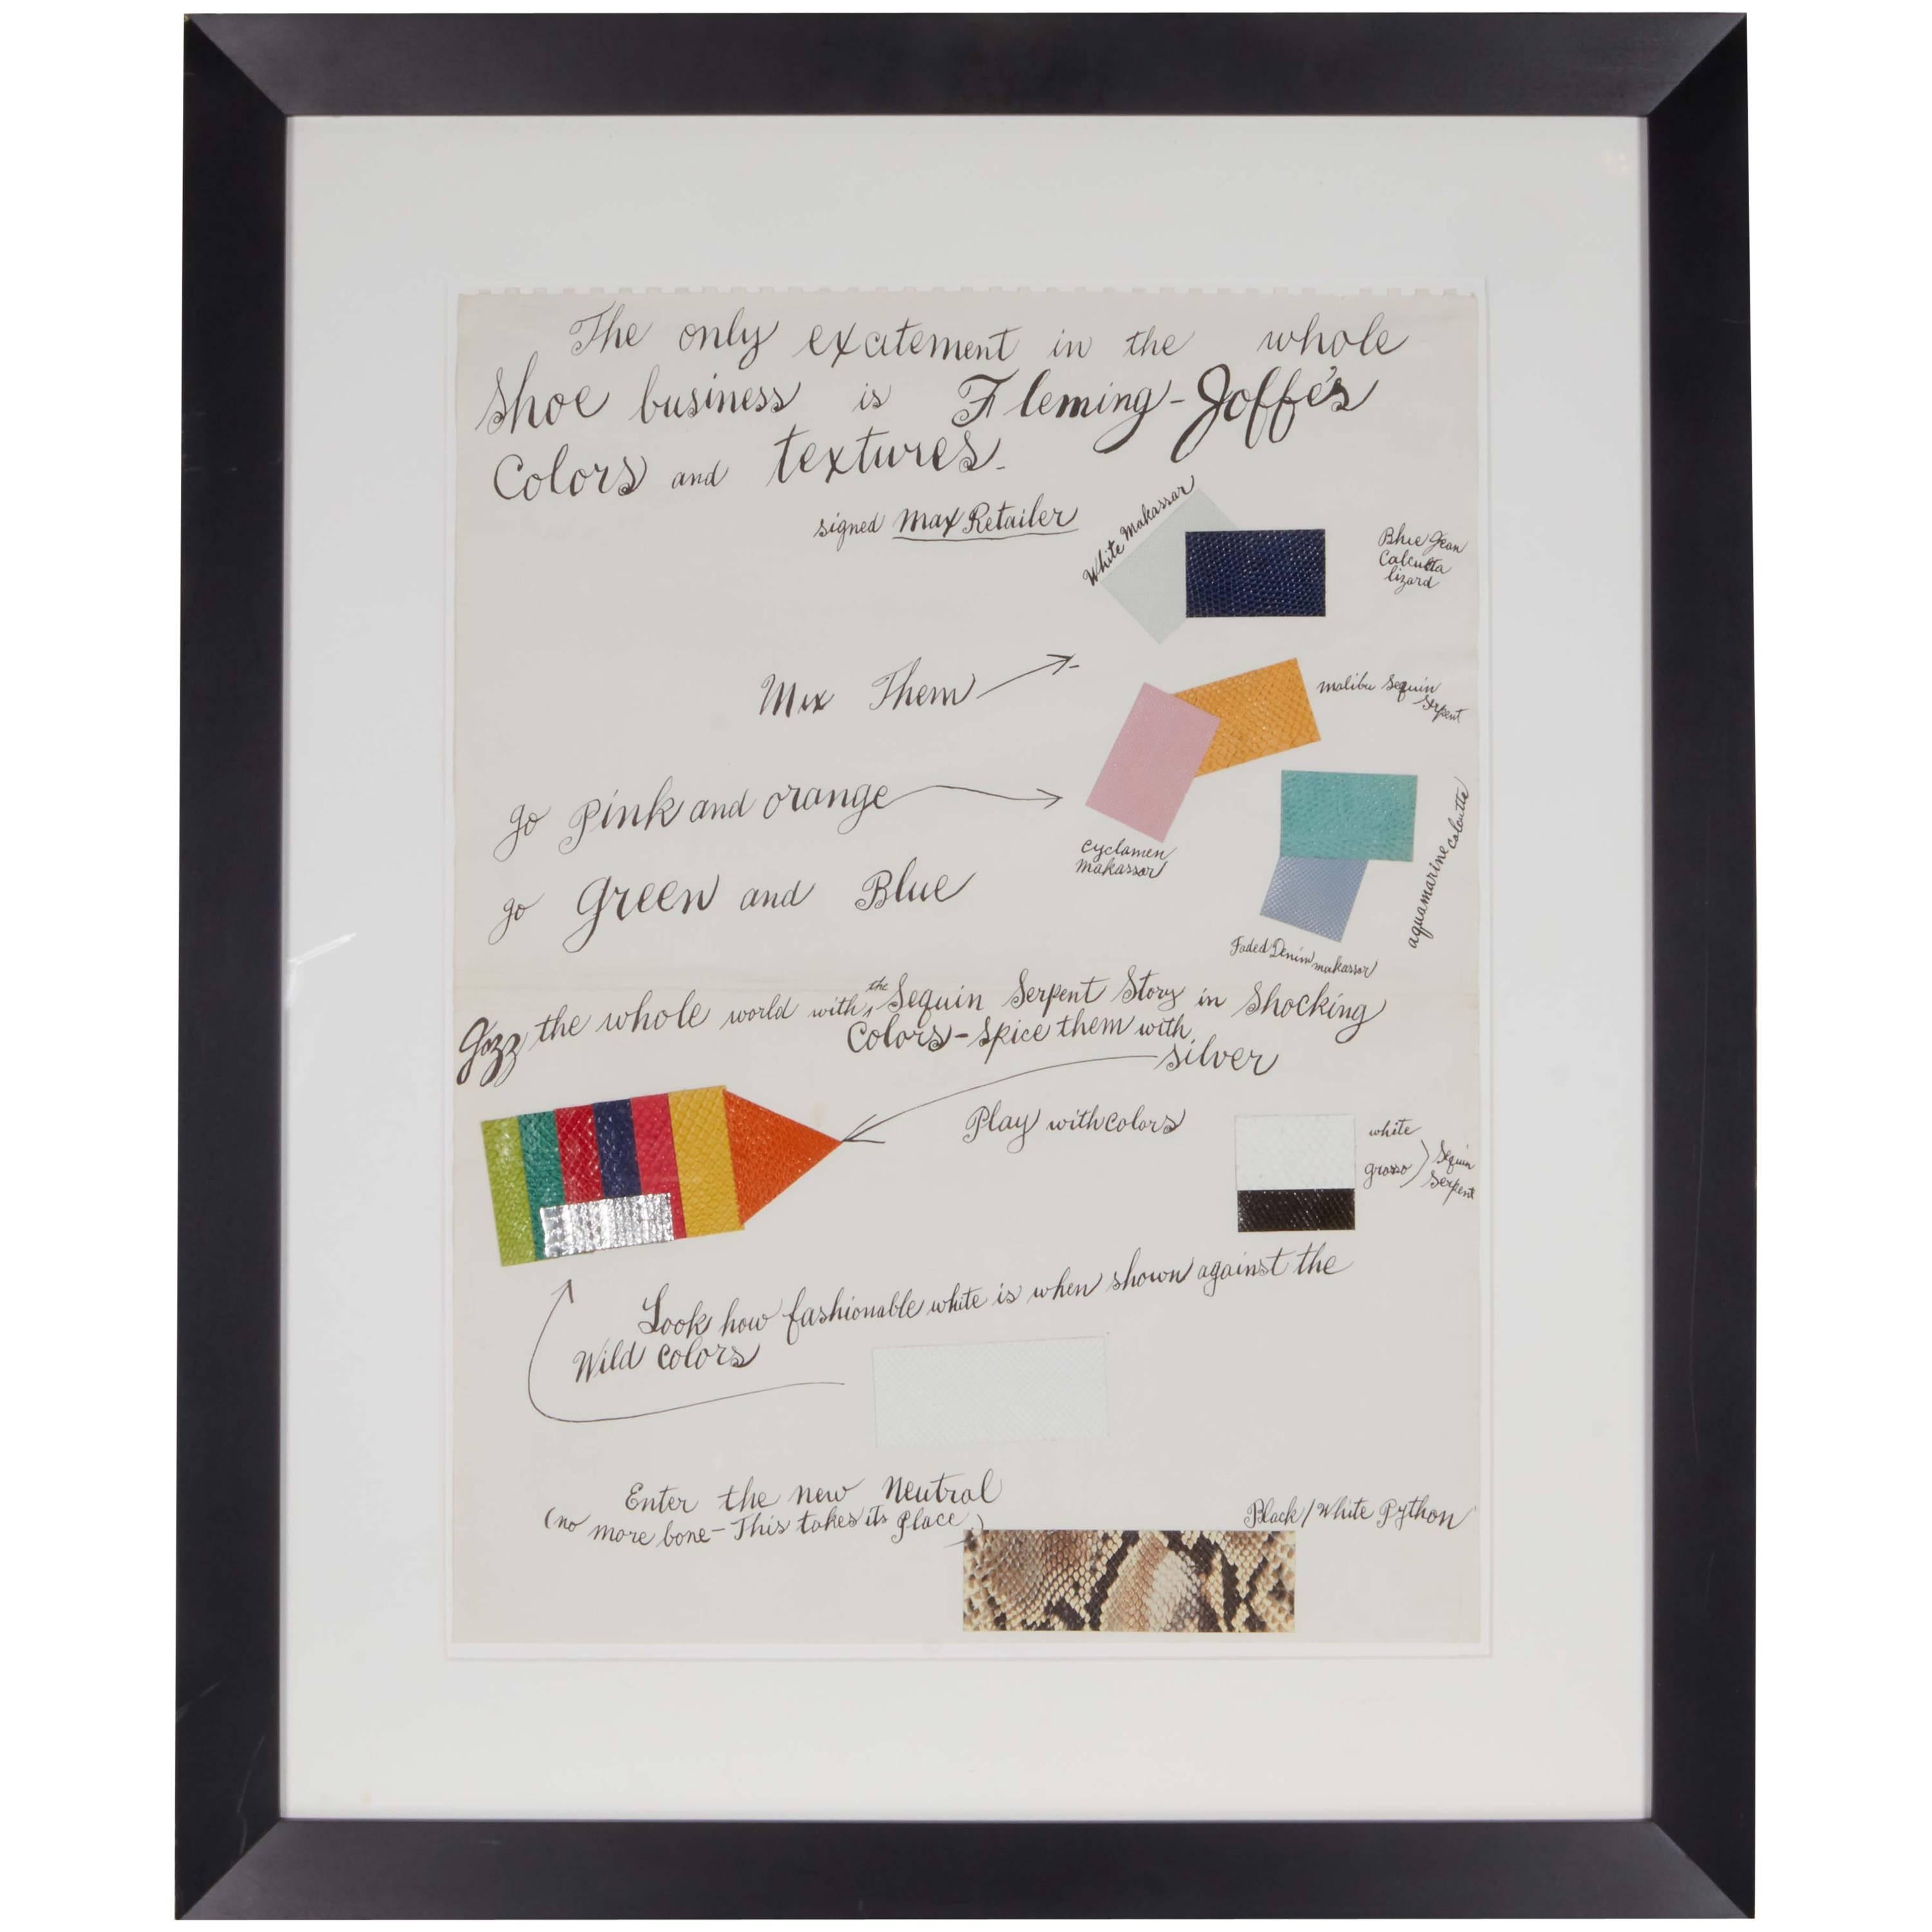 Andy Warhol, Offset Lithograph with Collage of Colored Leather Samples, 1960 For Sale